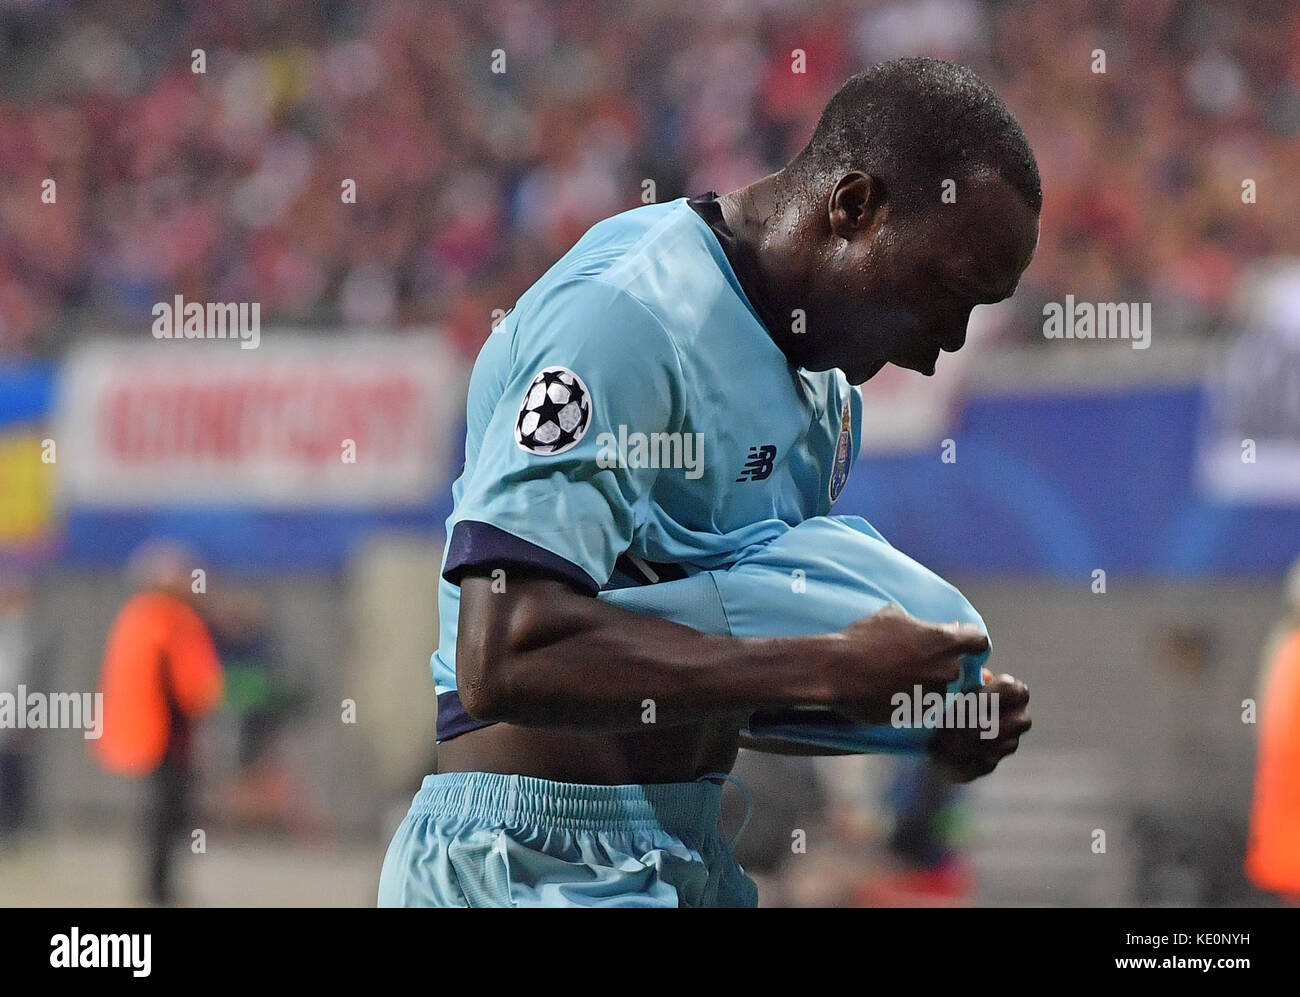 Leipzig, Germany. 17th Oct, 2017. Porto's Vincent Aboubakar celebrates after scoring an equaliser during the Champions League group stages qualification match between RB Leipzig and FC Porto in the Red Bull Arena in Leipzig, Germany, 17 October 2017. Credit: Hendrik Schmidt/dpa-Zentralbild/ZB/dpa/Alamy Live News Stock Photo